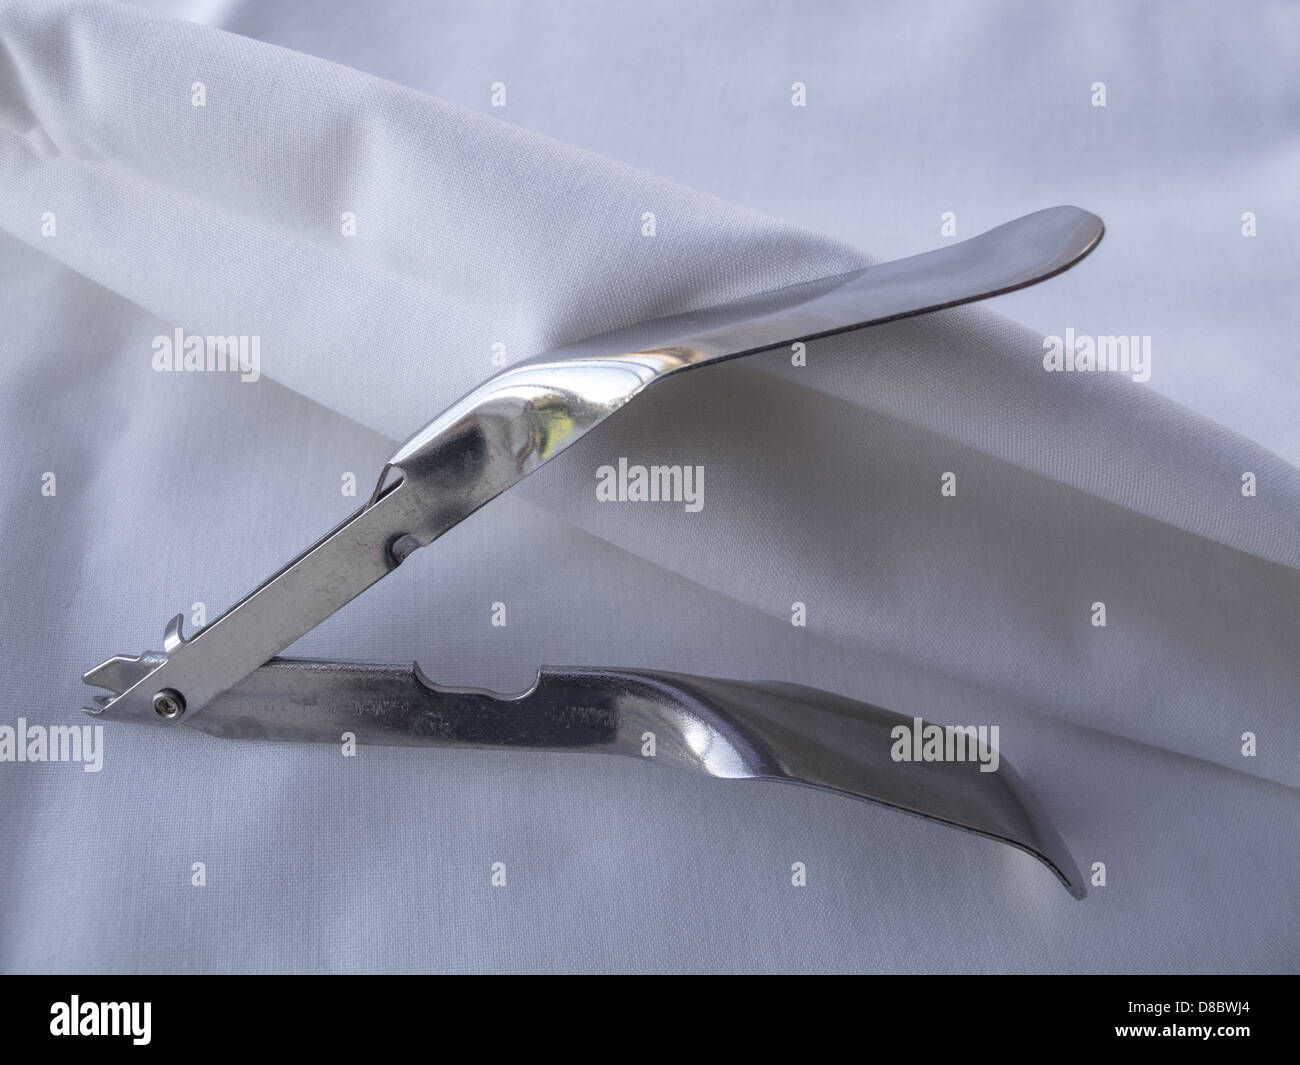 Surgical instrument for removing surgical clips from healed surgical incisions. Showing details if tines which grip the clips. Stock Photo